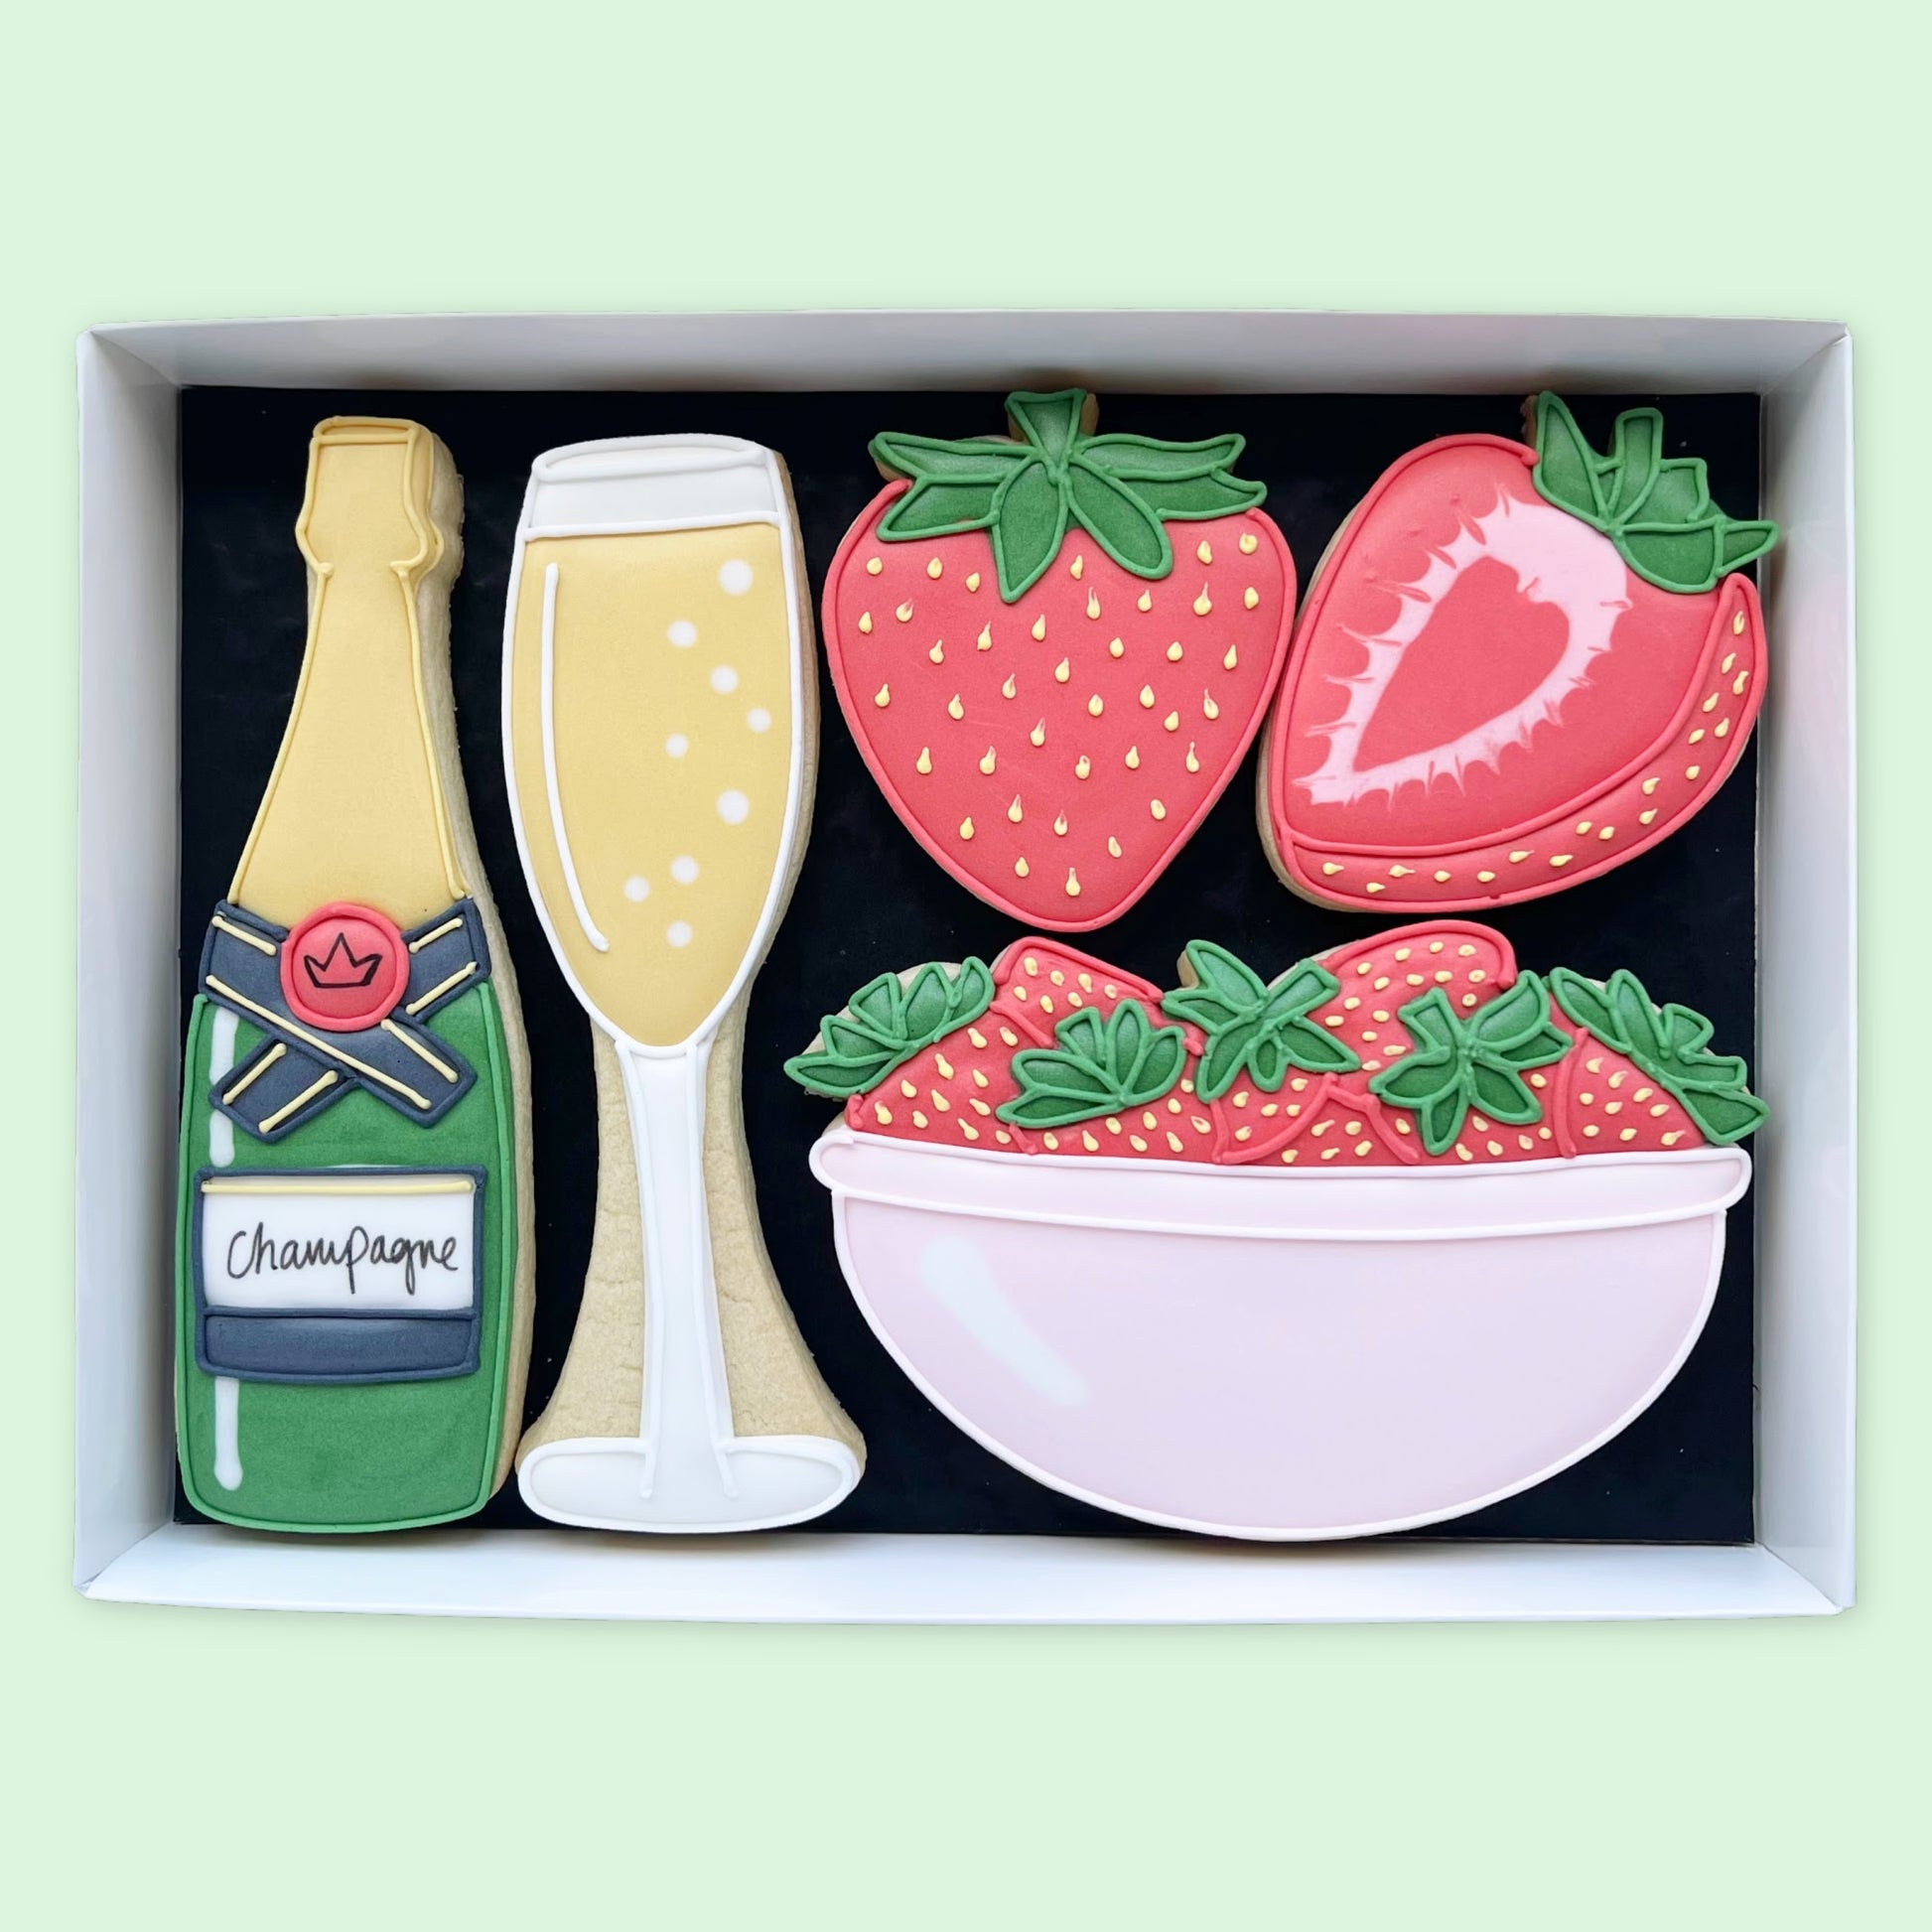 Hand iced champagne bottle glass and strawberry biscuits in an open white gift box by Katie's biscuit shop  